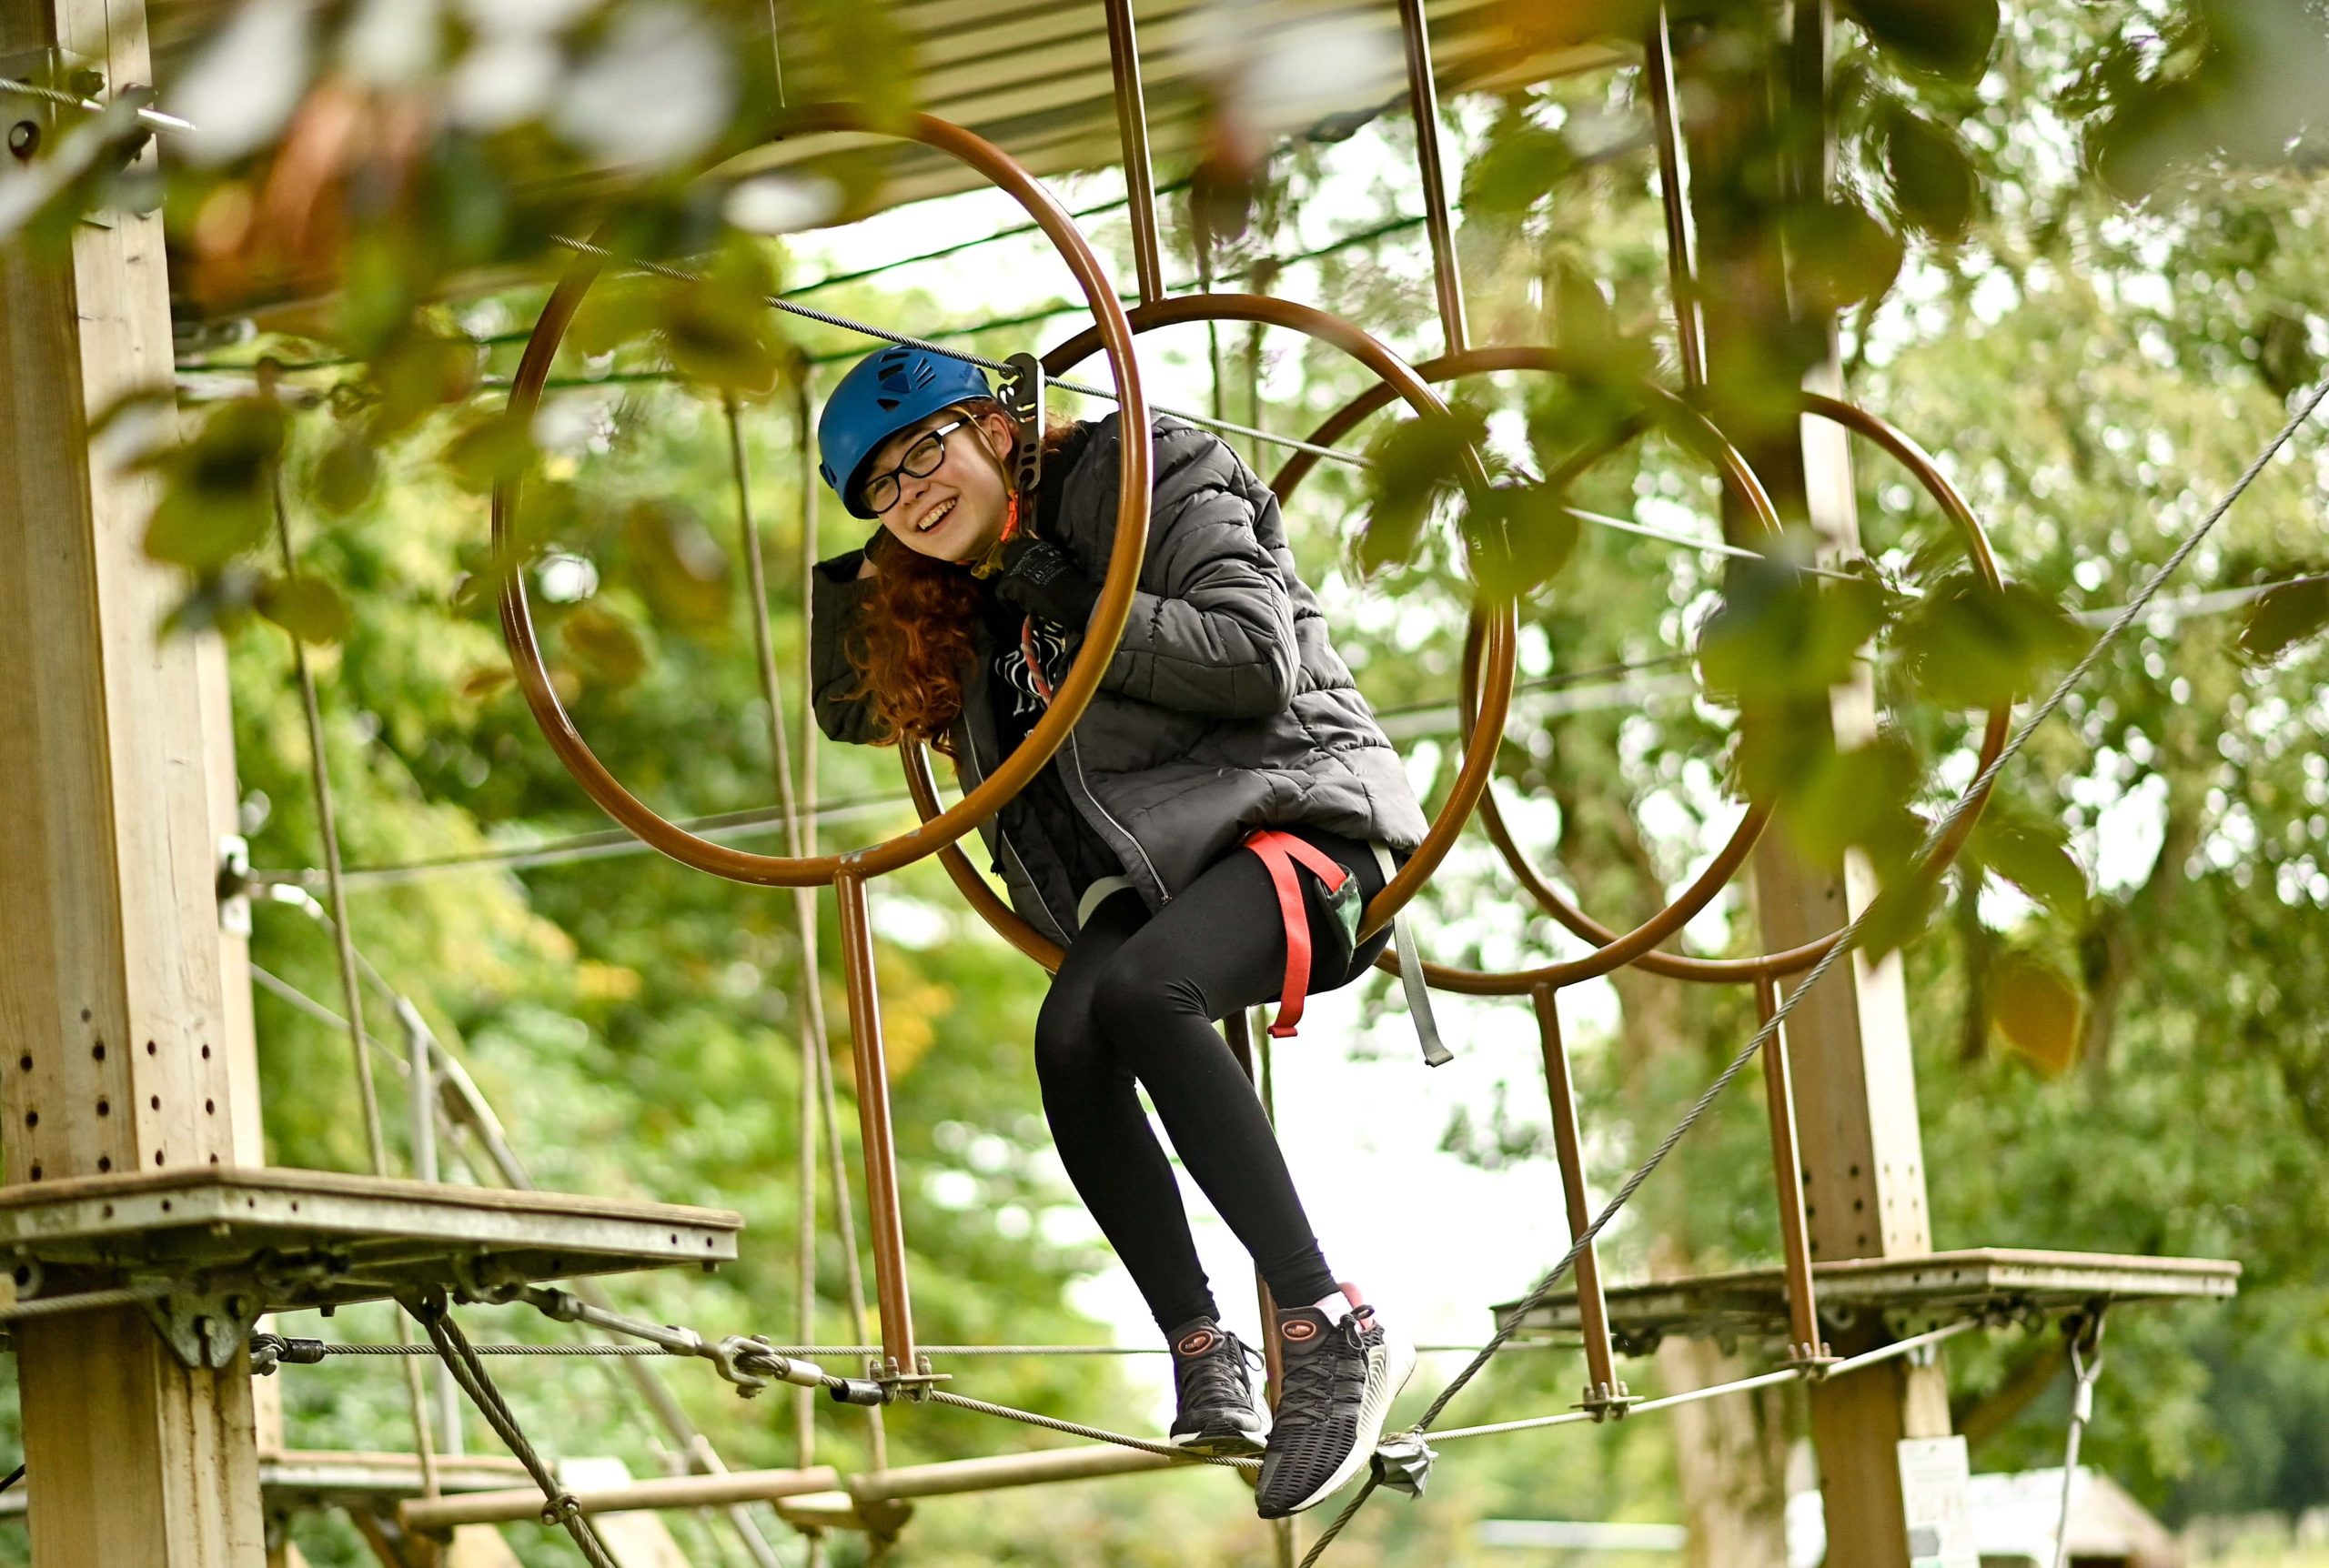 A girl goes through rings in an obstacle course in the woods. She is attached by a harness and is laughing